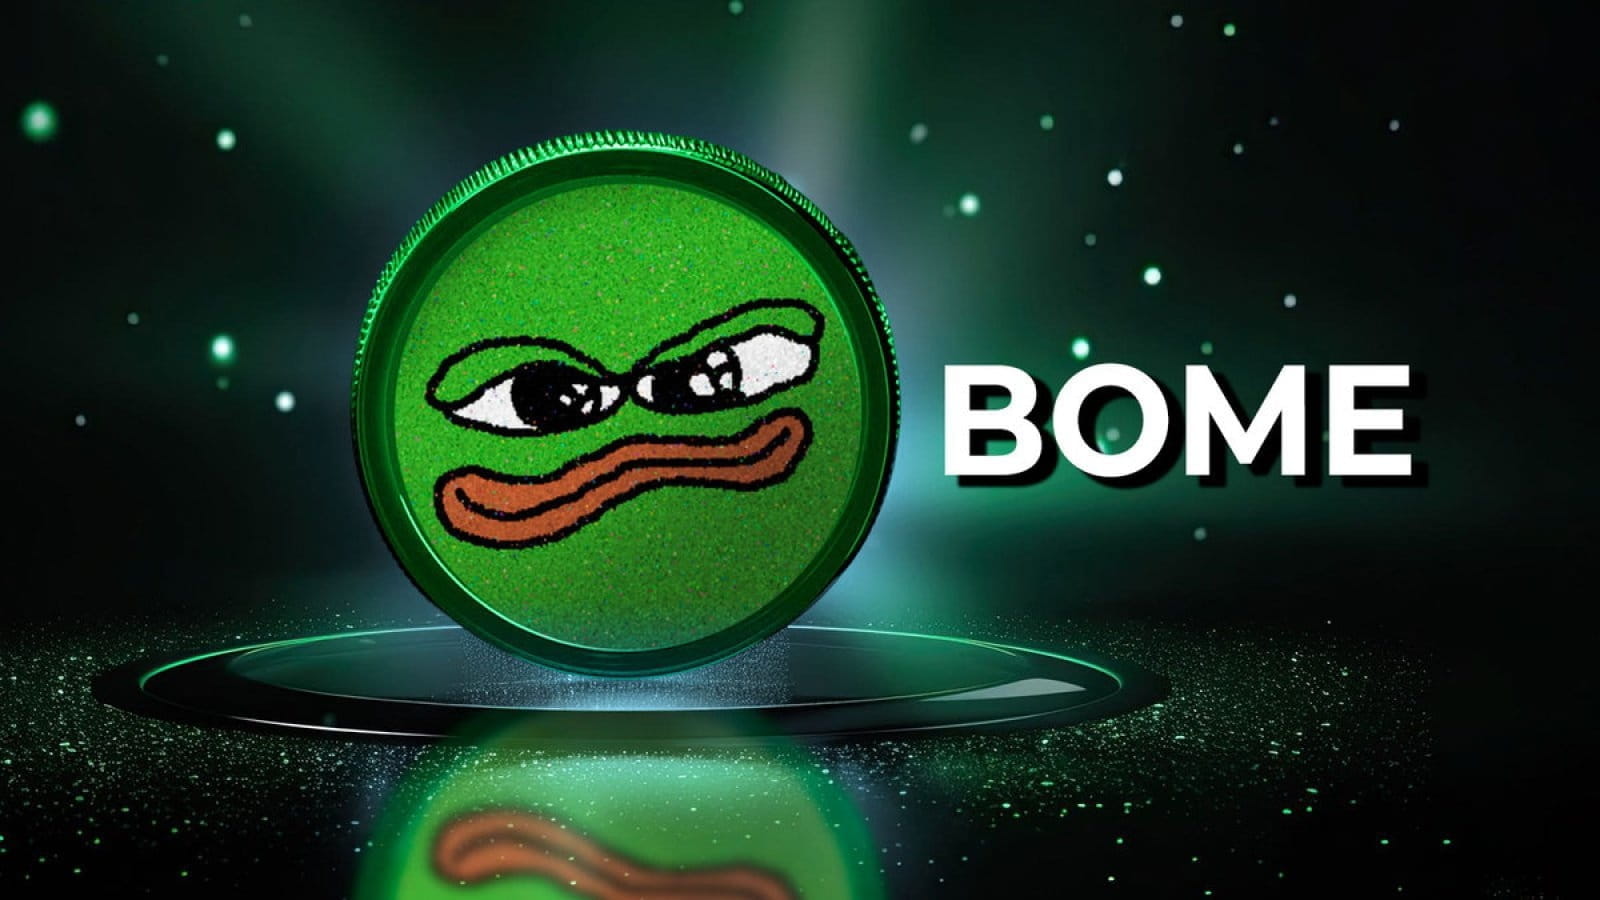 Book Of Meme (BOME) Continues To Decline Under $0.08, Hold or Sell?